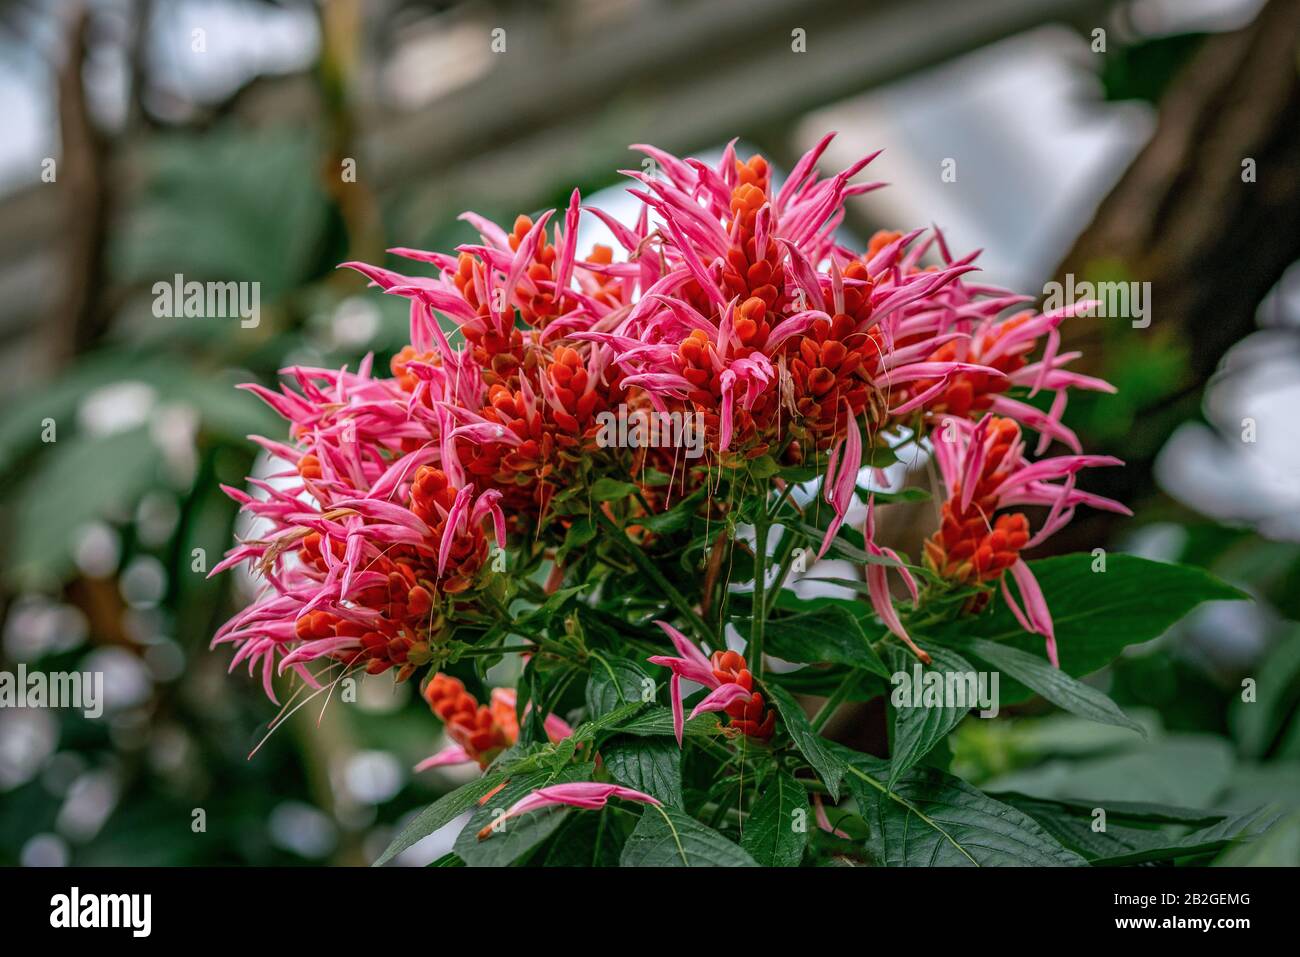 Close up of a cluster of pink flowers on a Aphelandra sinclairiana (panama queen) plant Stock Photo